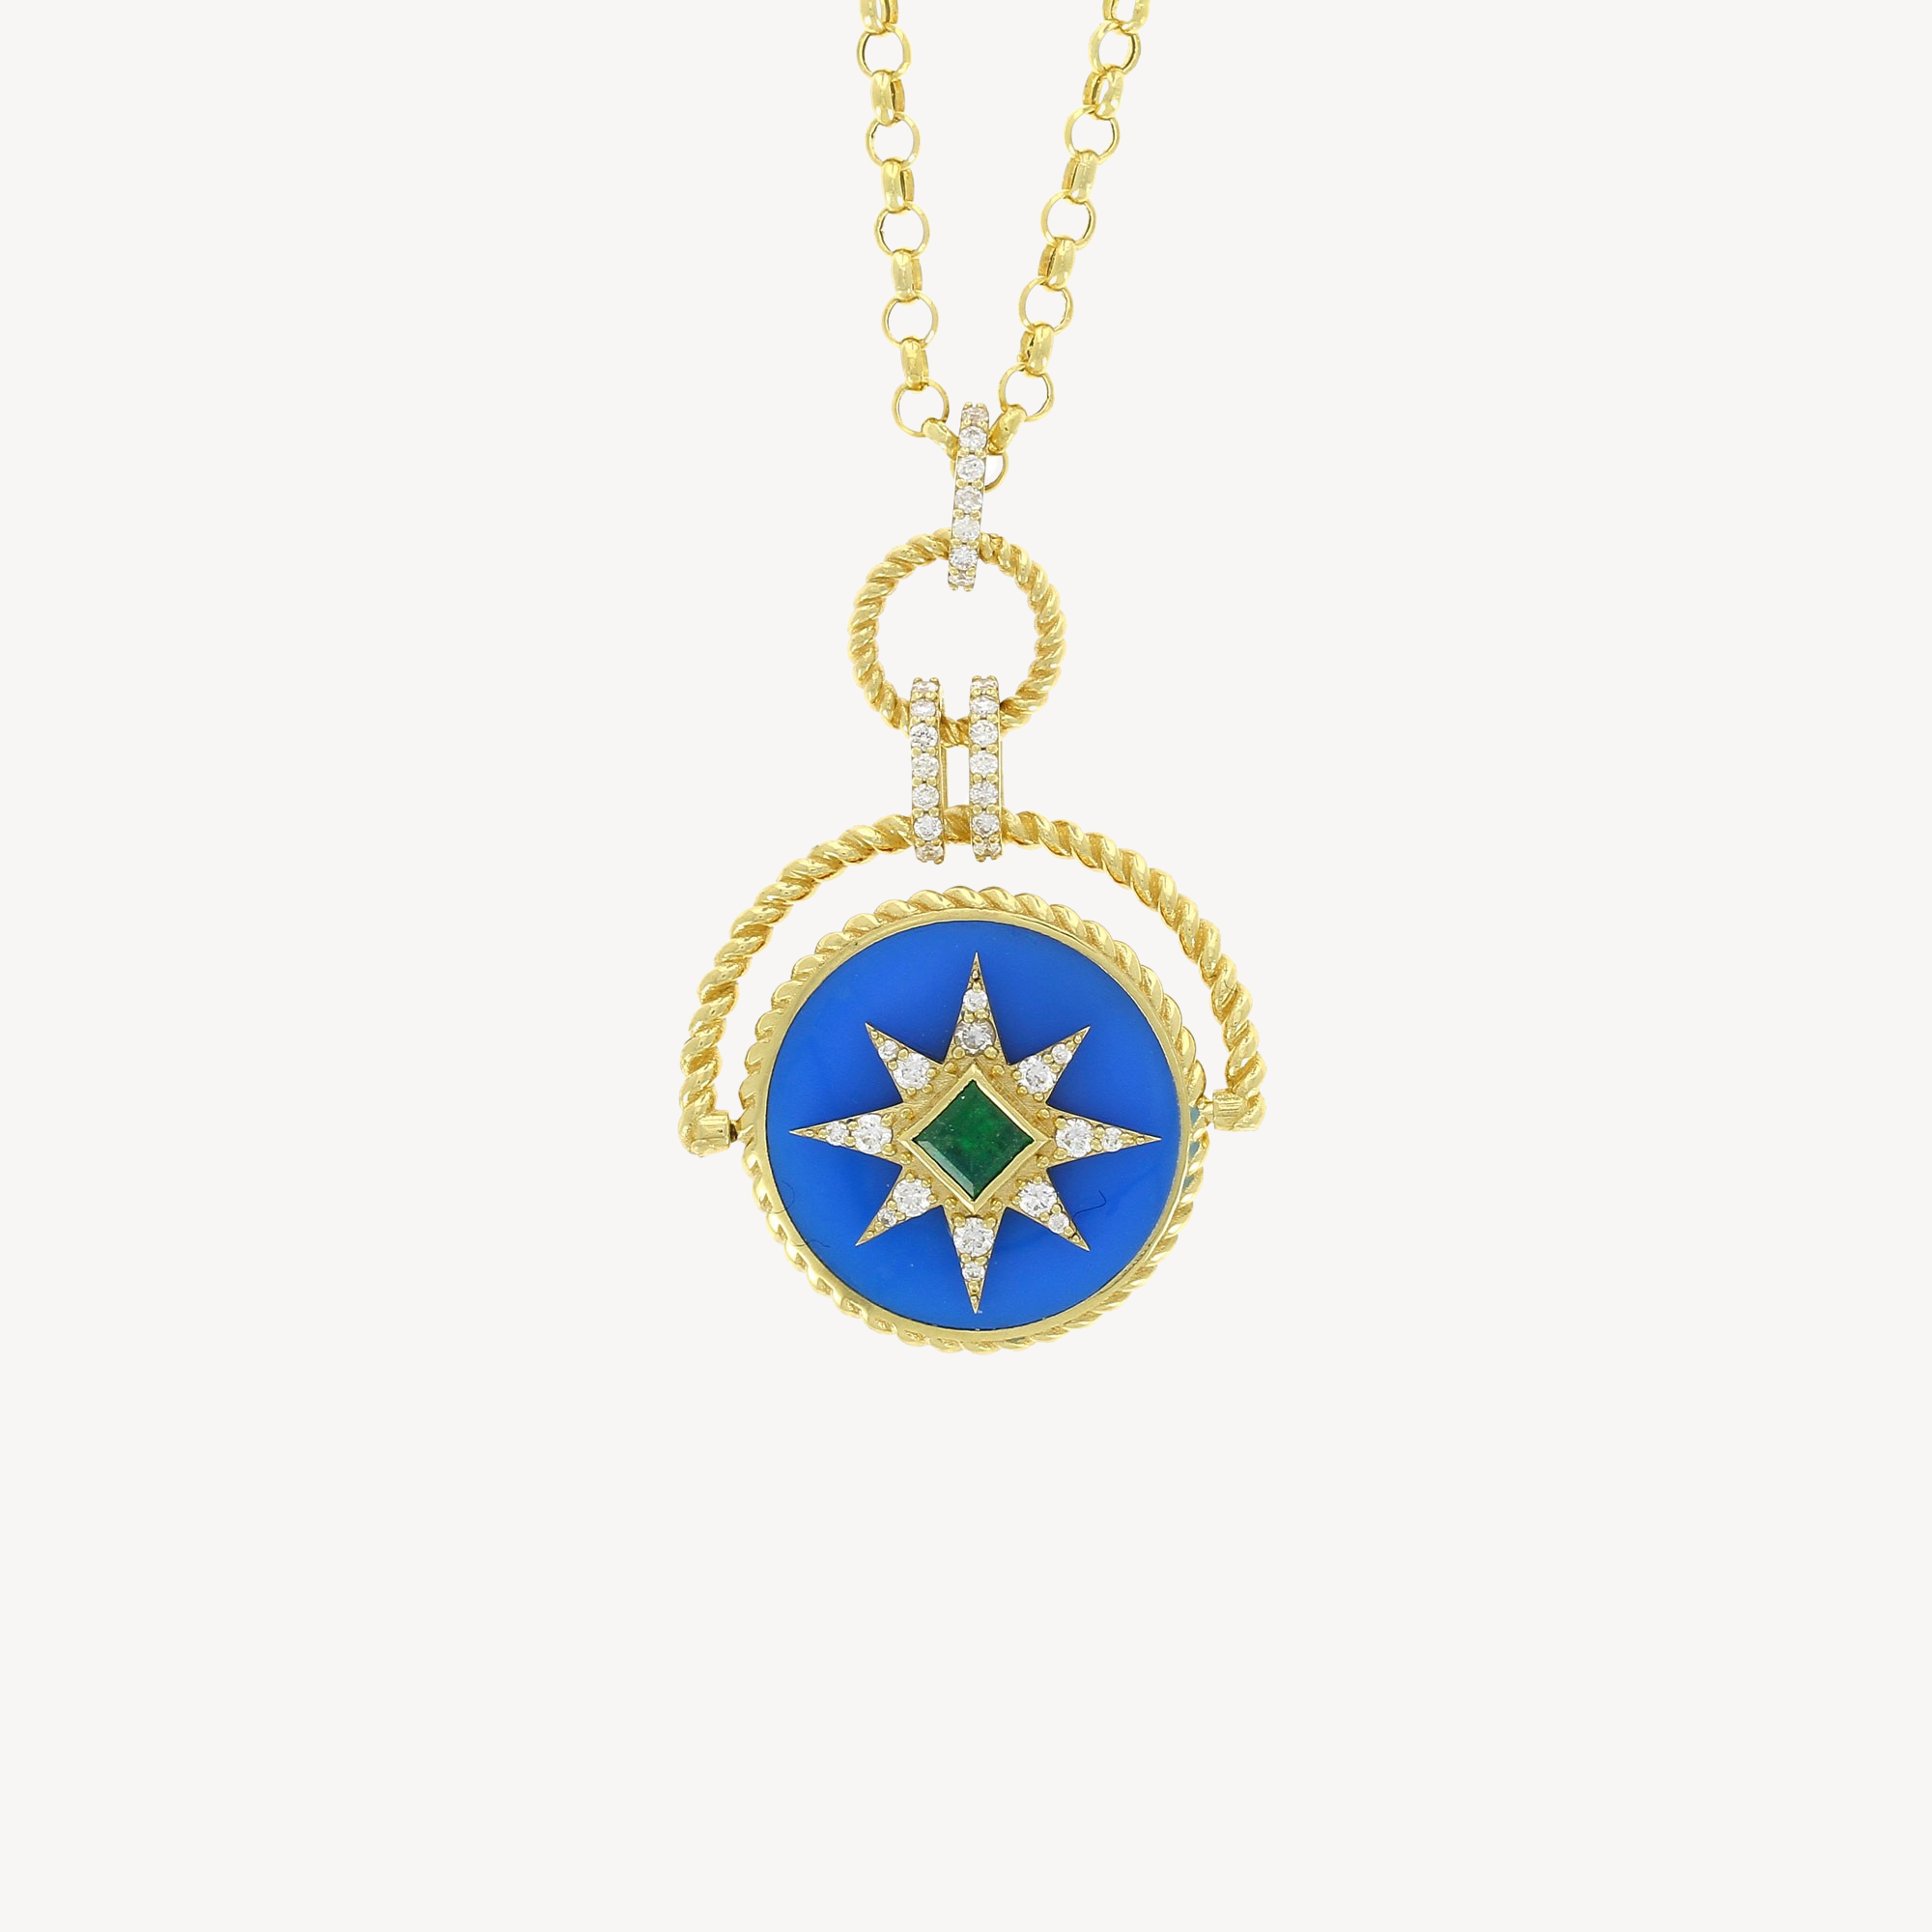 Double Sided Spin Pendant Necklace